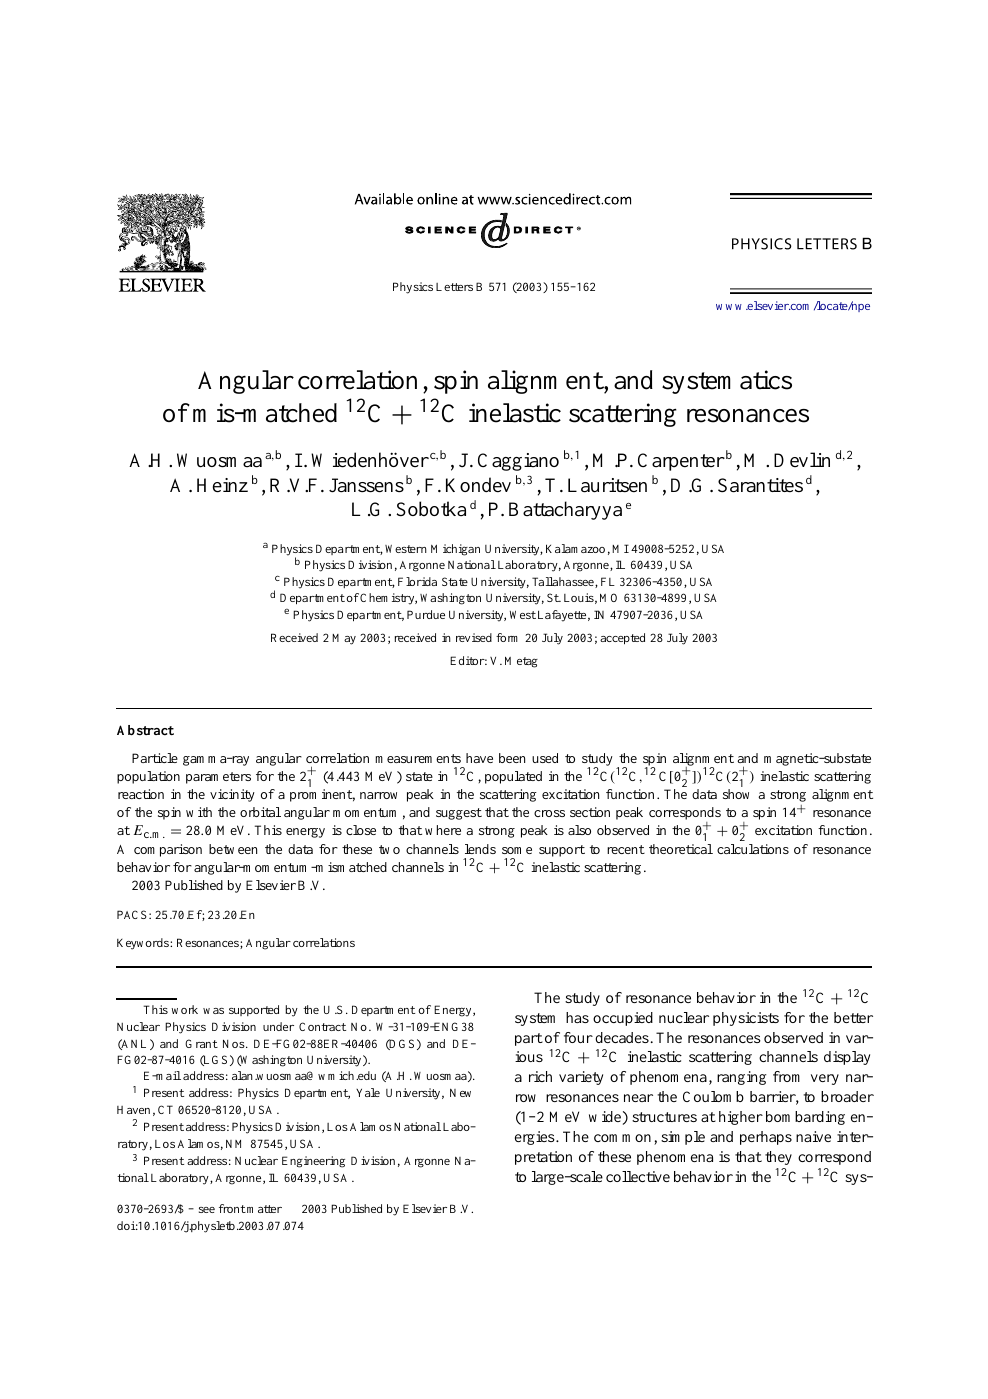 Angular Correlation Spin Alignment And Systematics Of Mis Matched 12c 12c Inelastic Scattering Resonances Topic Of Research Paper In Physical Sciences Download Scholarly Article Pdf And Read For Free On Cyberleninka Open Science